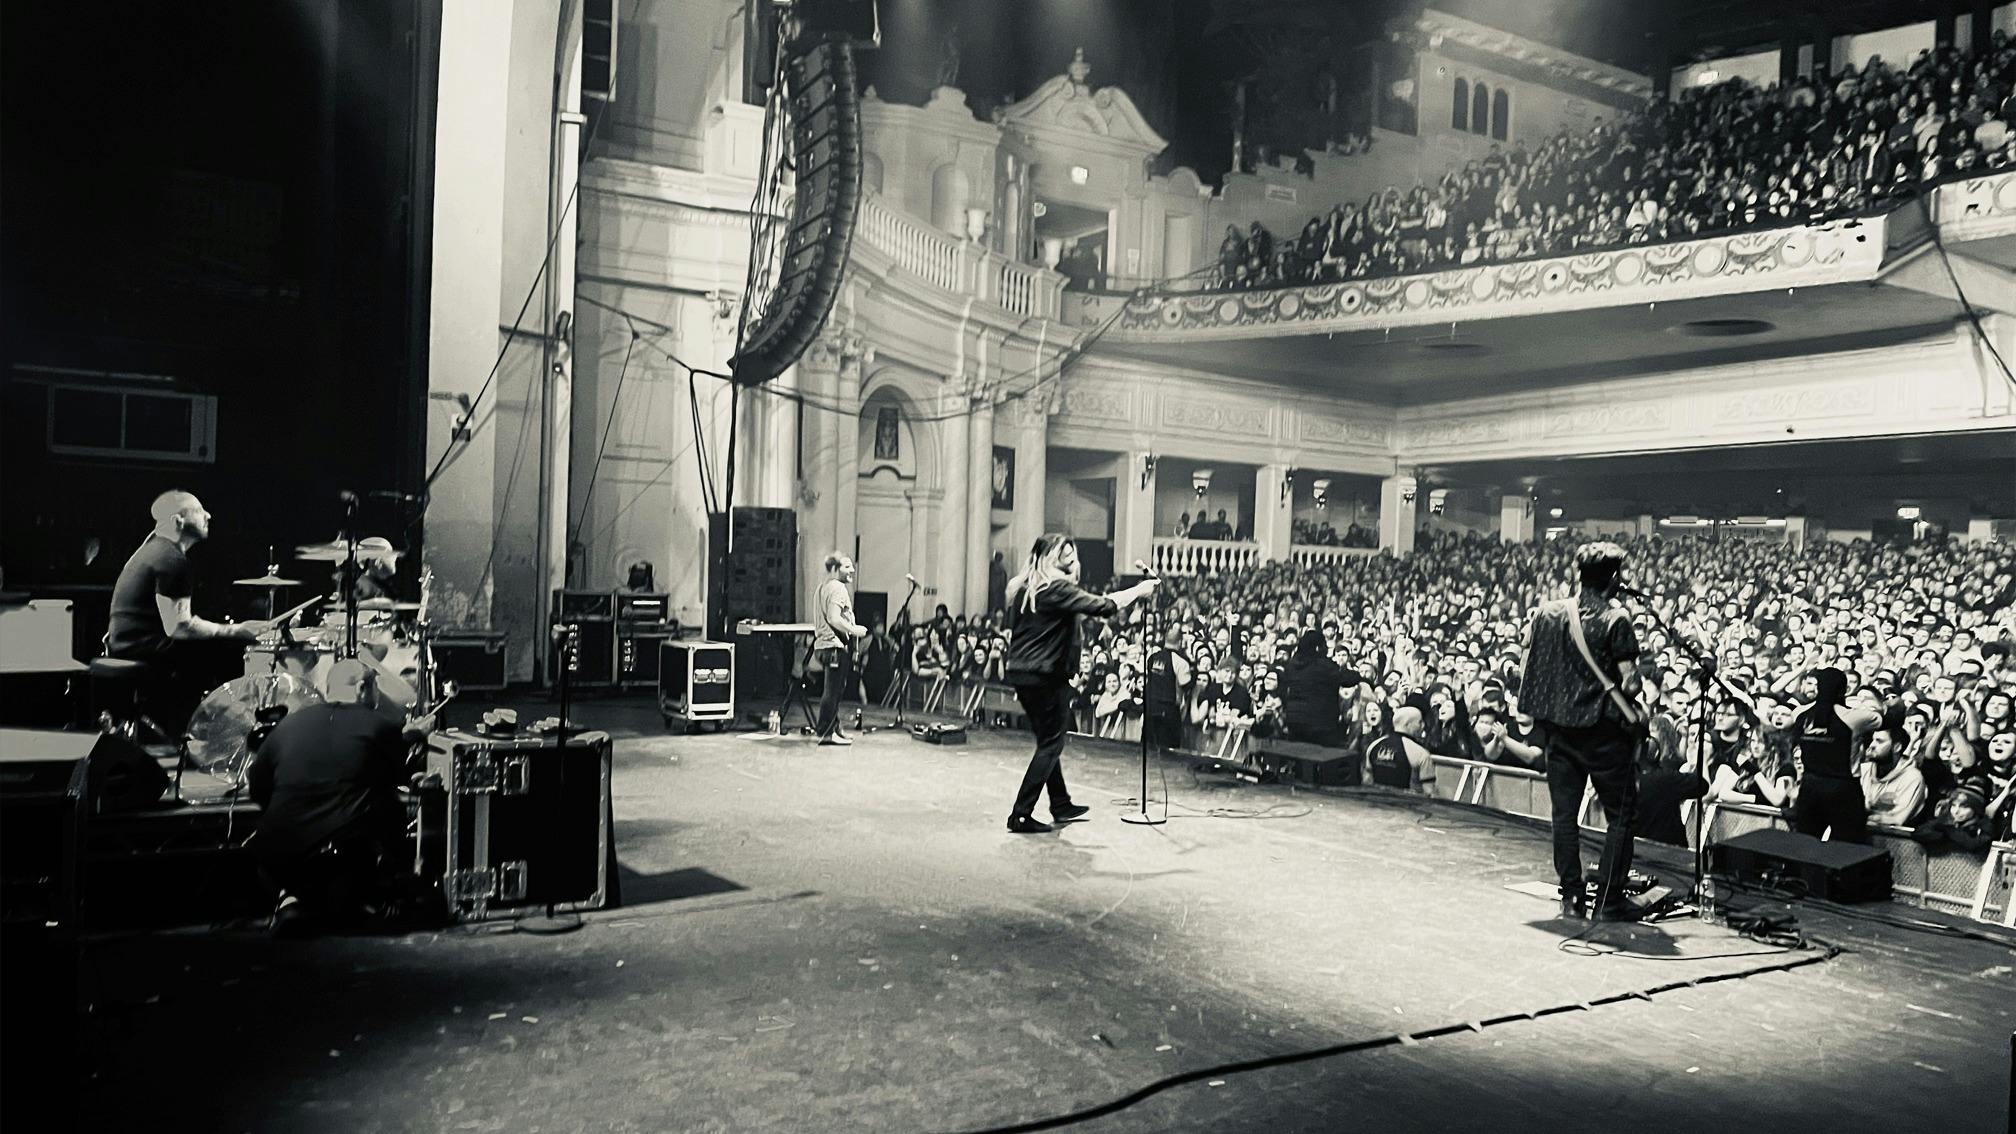 In pictures: Taking Back Sunday and Alkaline Trio’s sold-out show at London’s O2 Academy Brixton